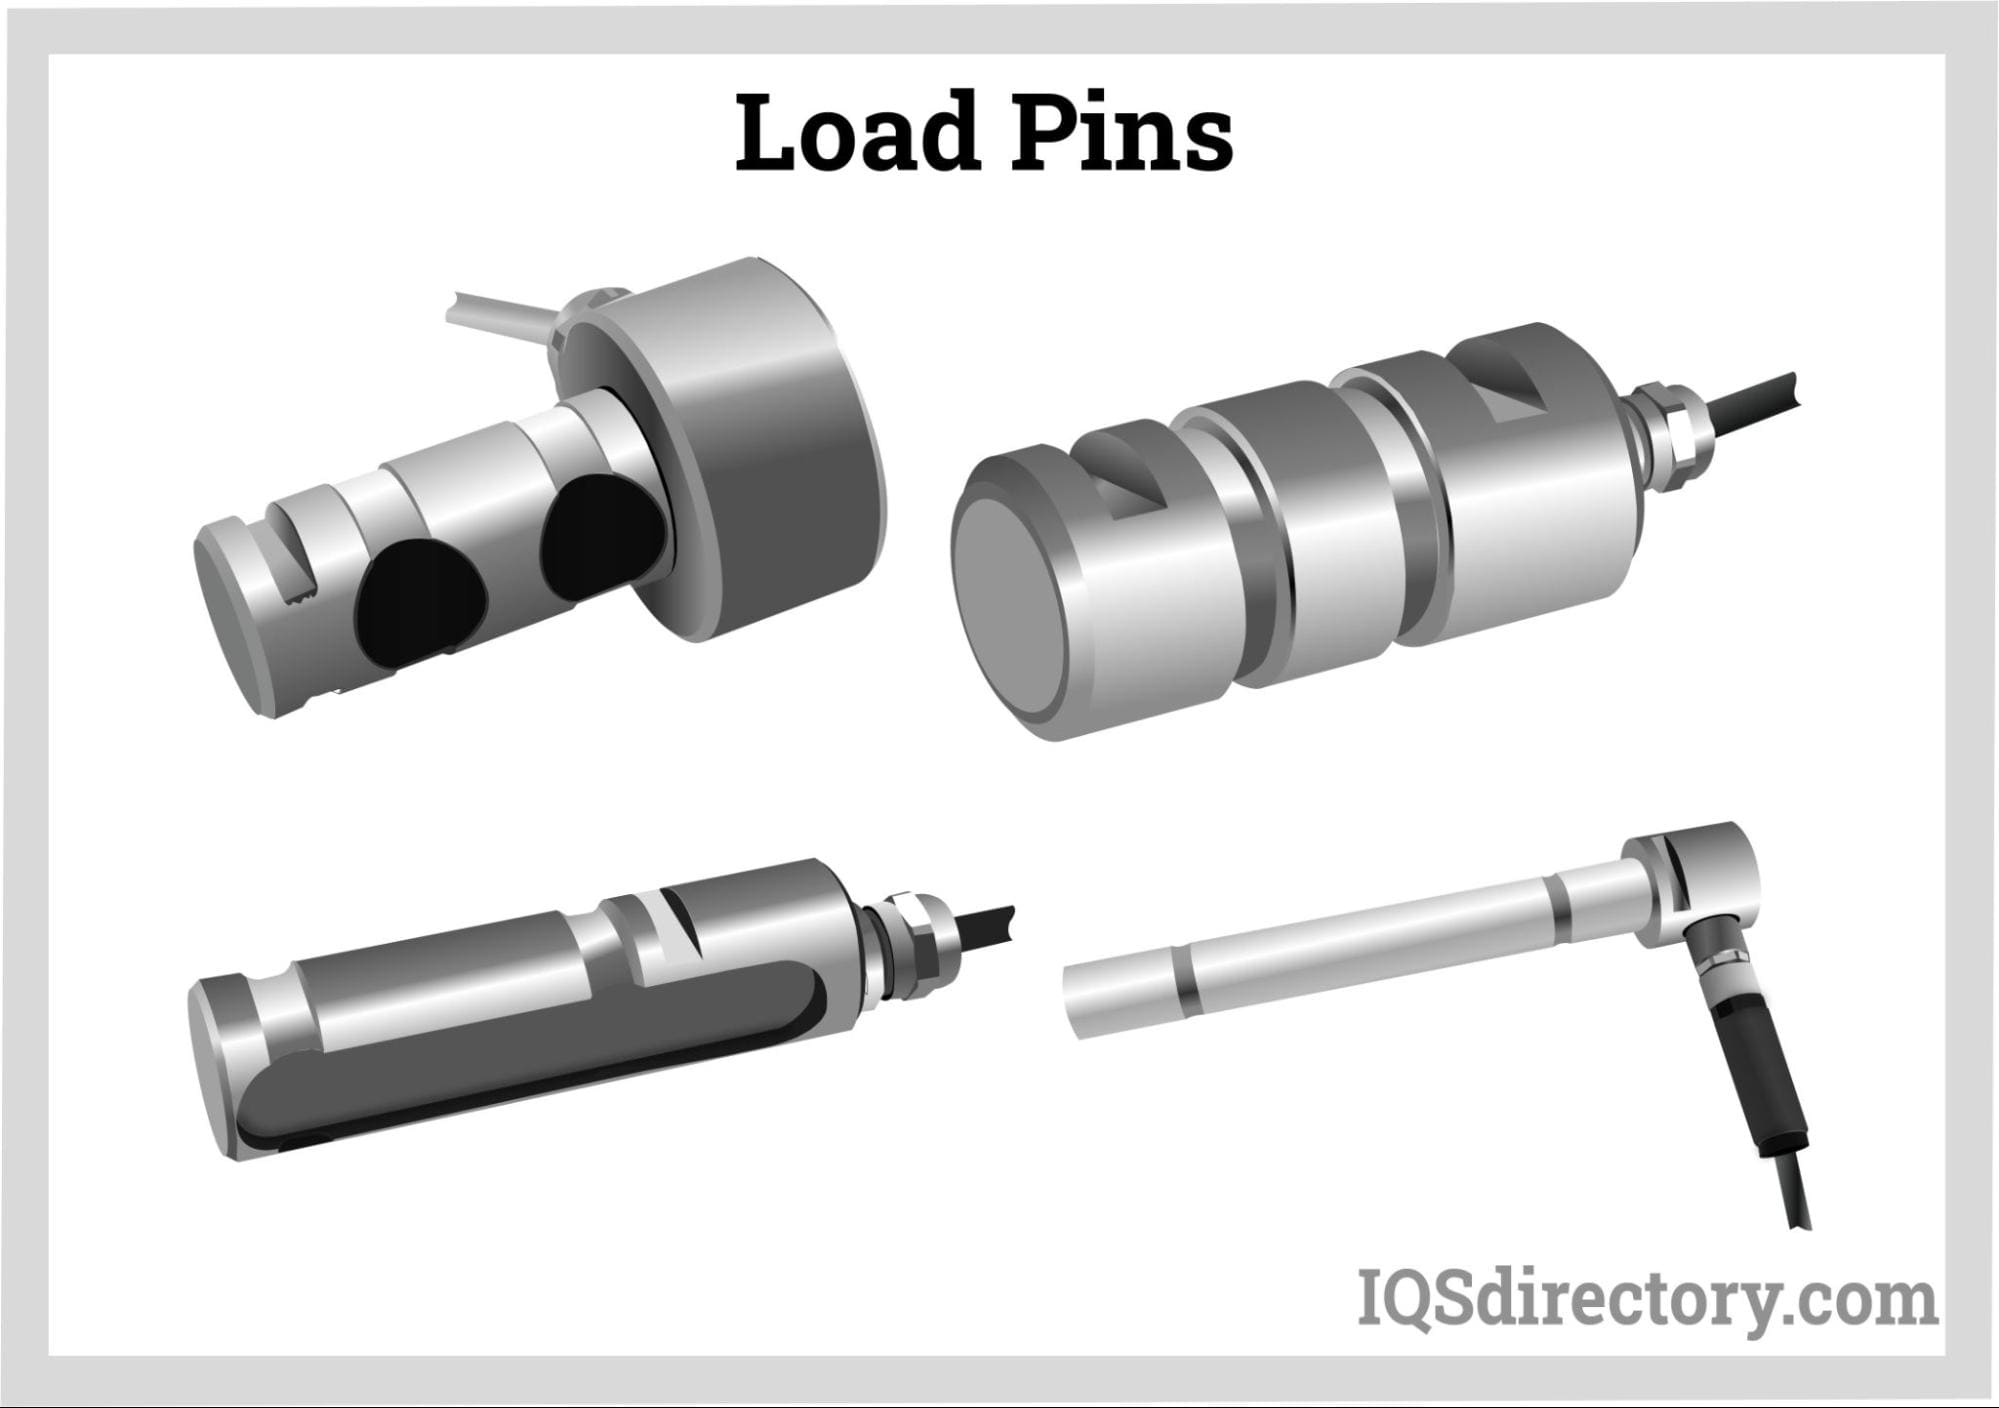 Tension Load Cells & Shackle Load Pins